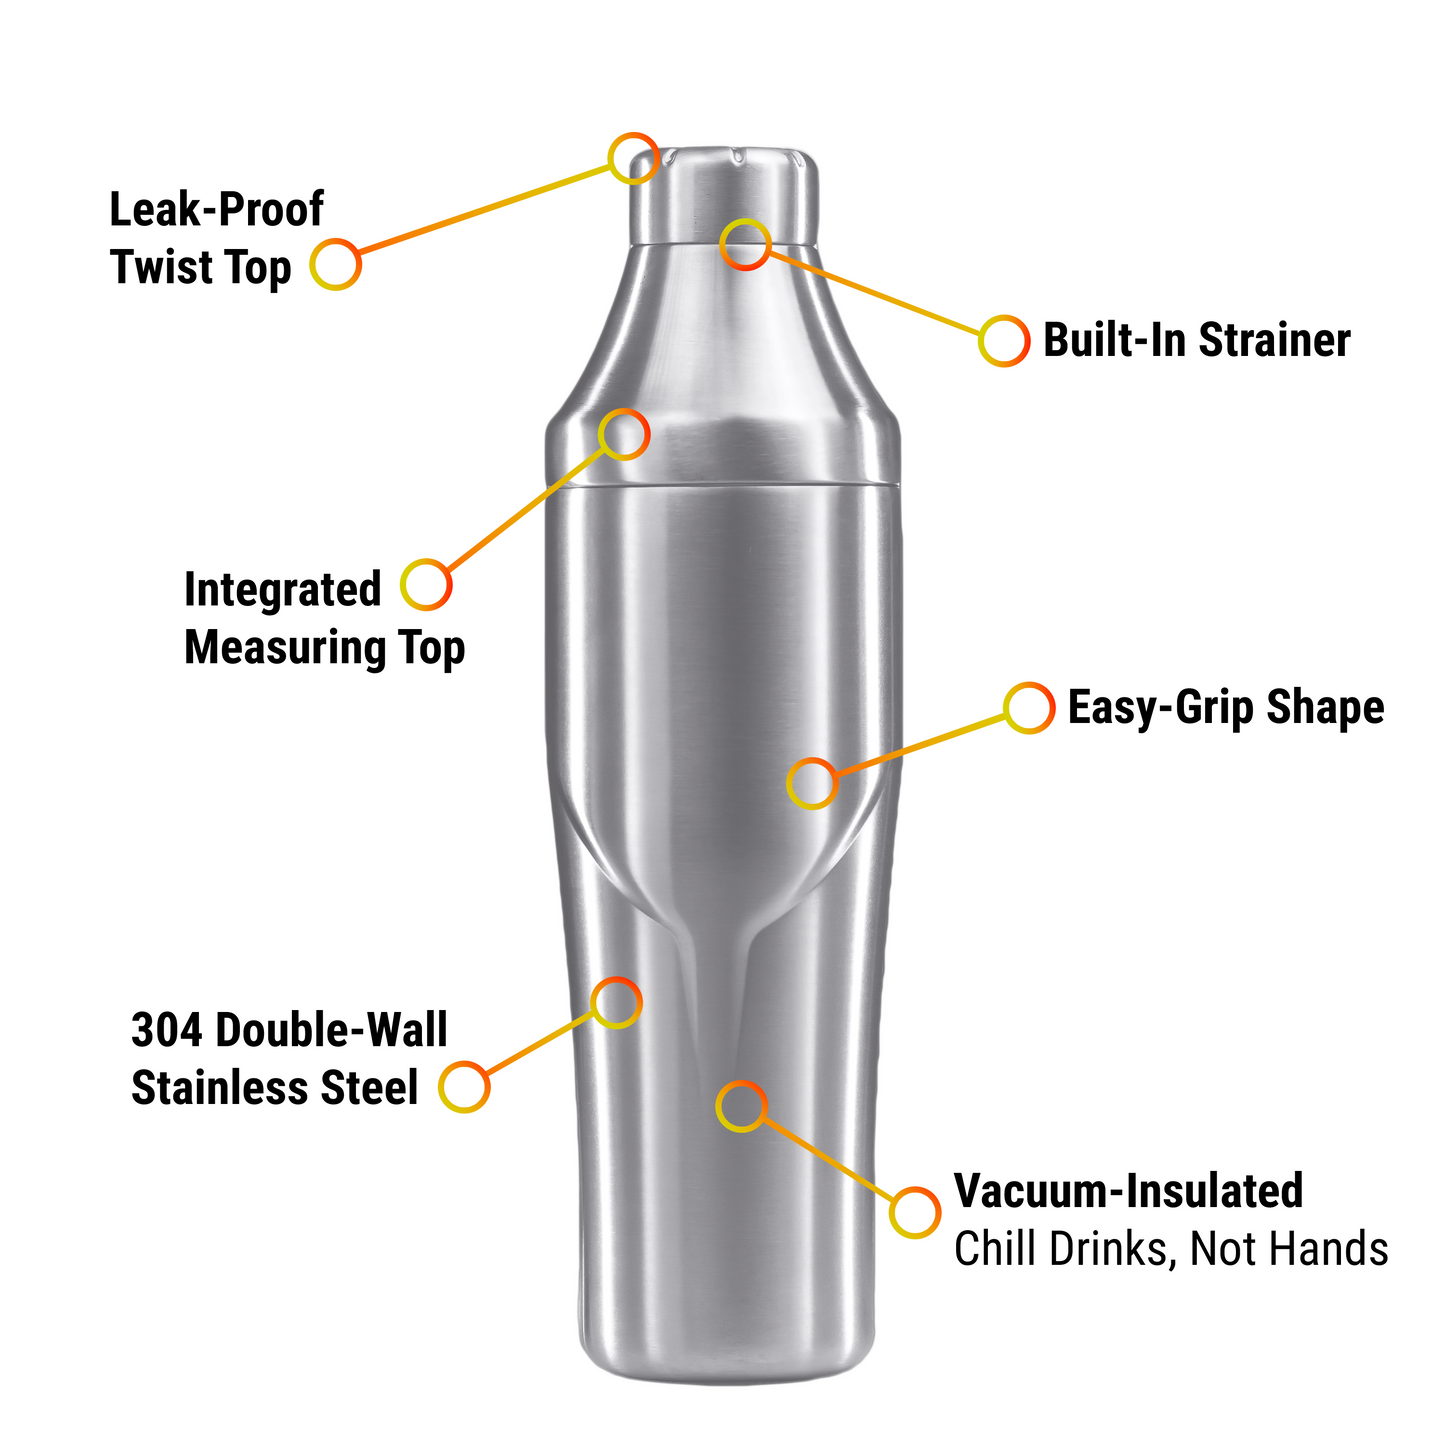 Lexenic 24oz Premium Vacuum Insulated Double Wall Cocktail Shaker